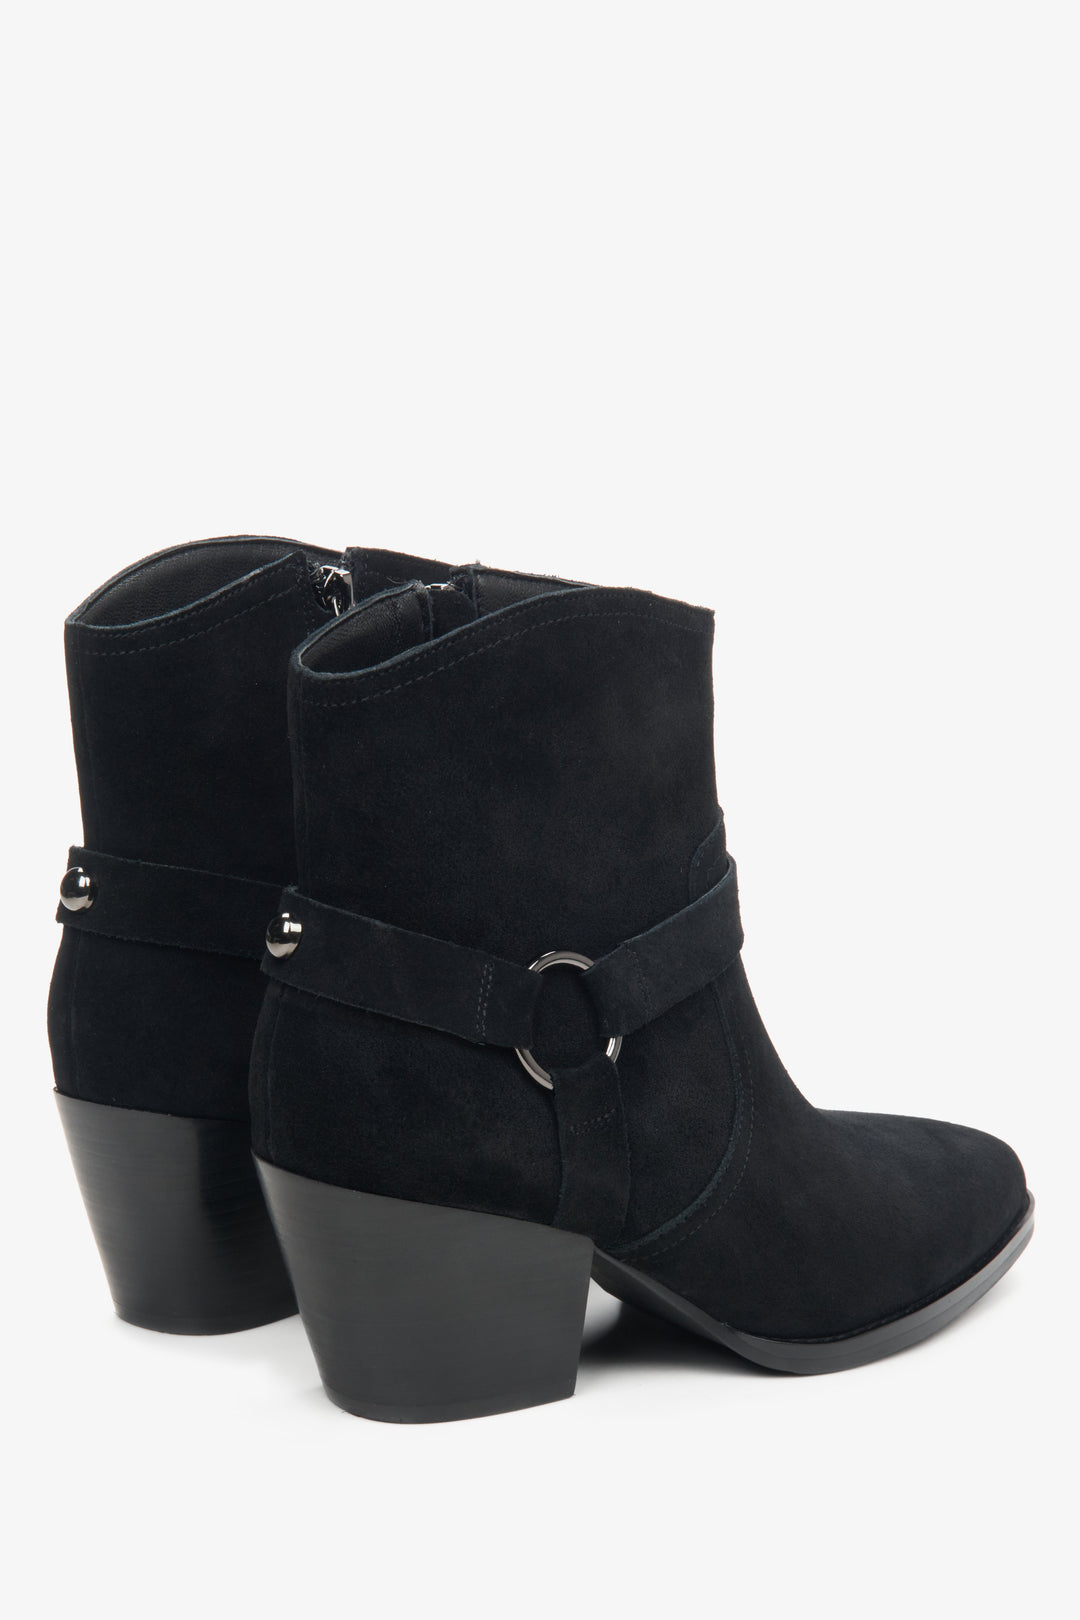 Women's low top black suede cowboy boots by Estro - close-up on the side line and heel line.